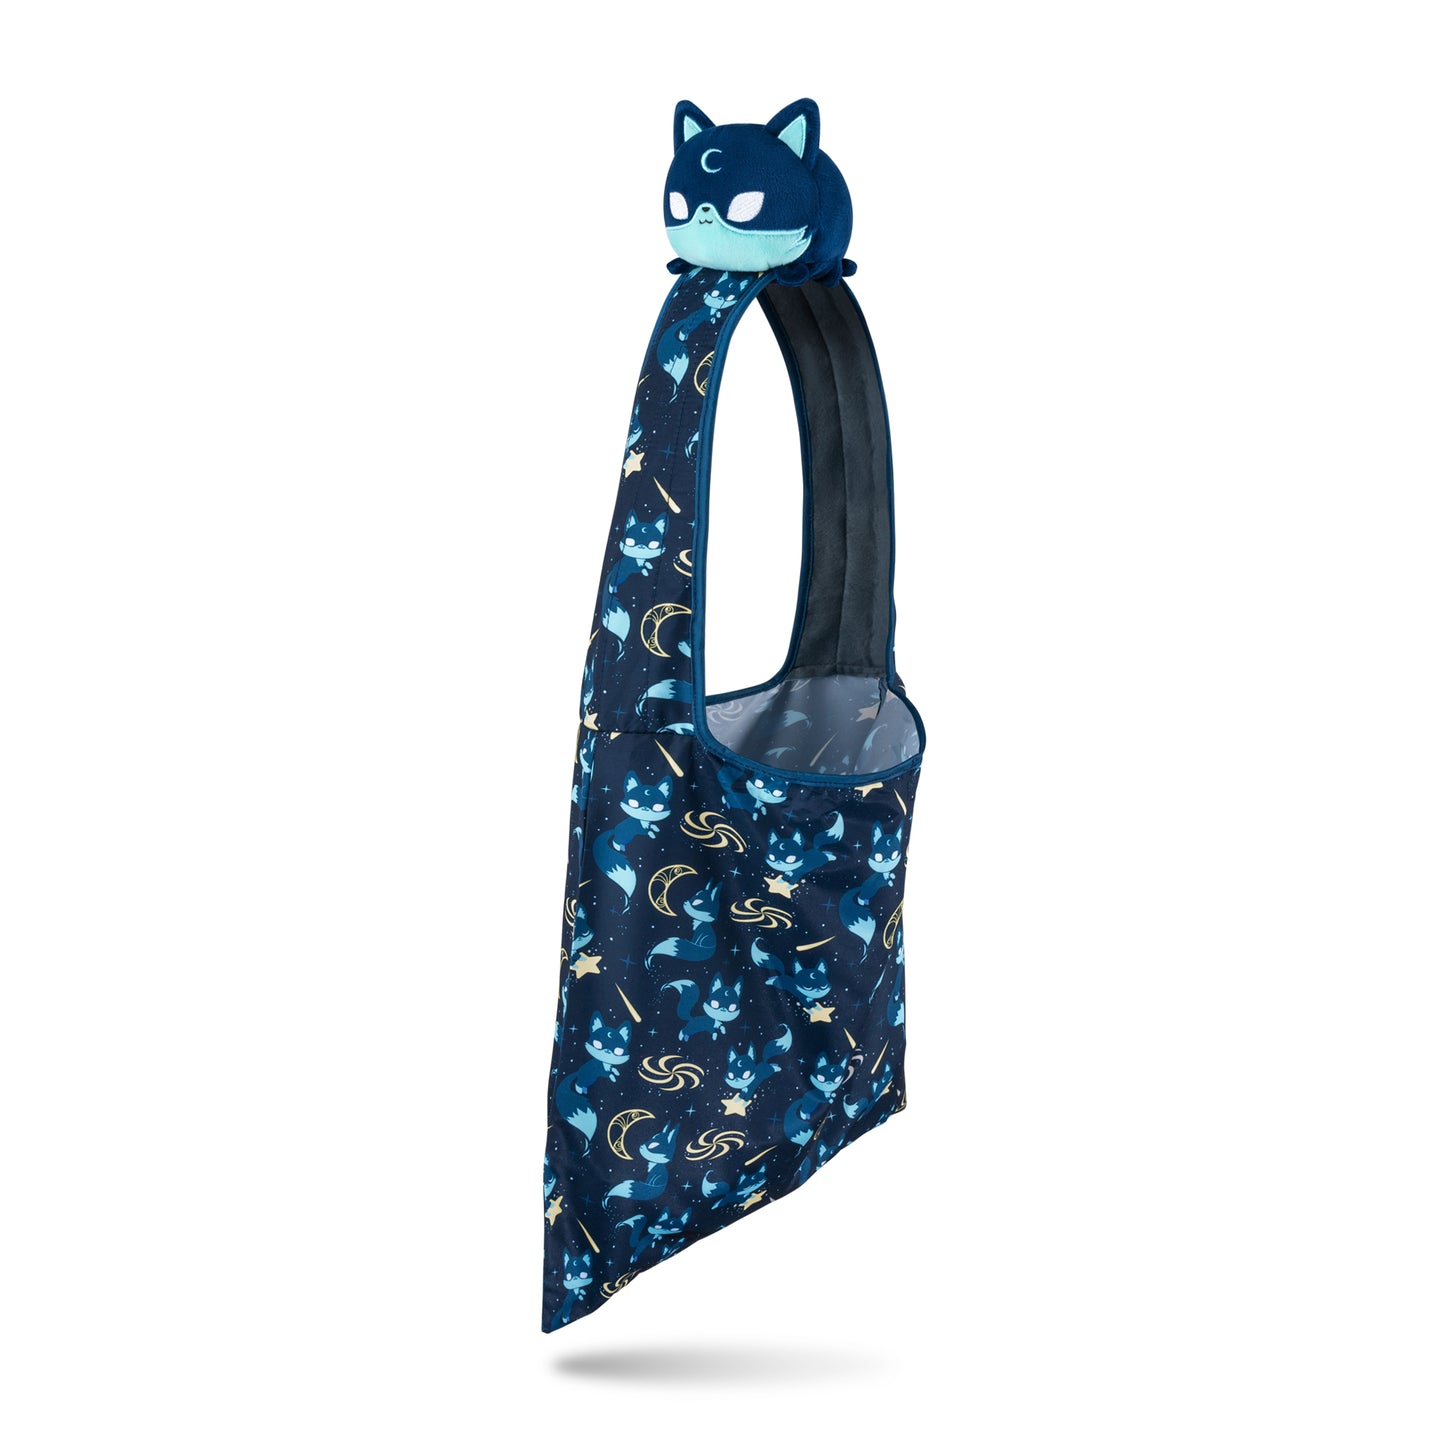 A cat-themed blue bib, perfect for TeeTurtle's Plushiverse Starry Fox Plushie Tote Bag enthusiasts.